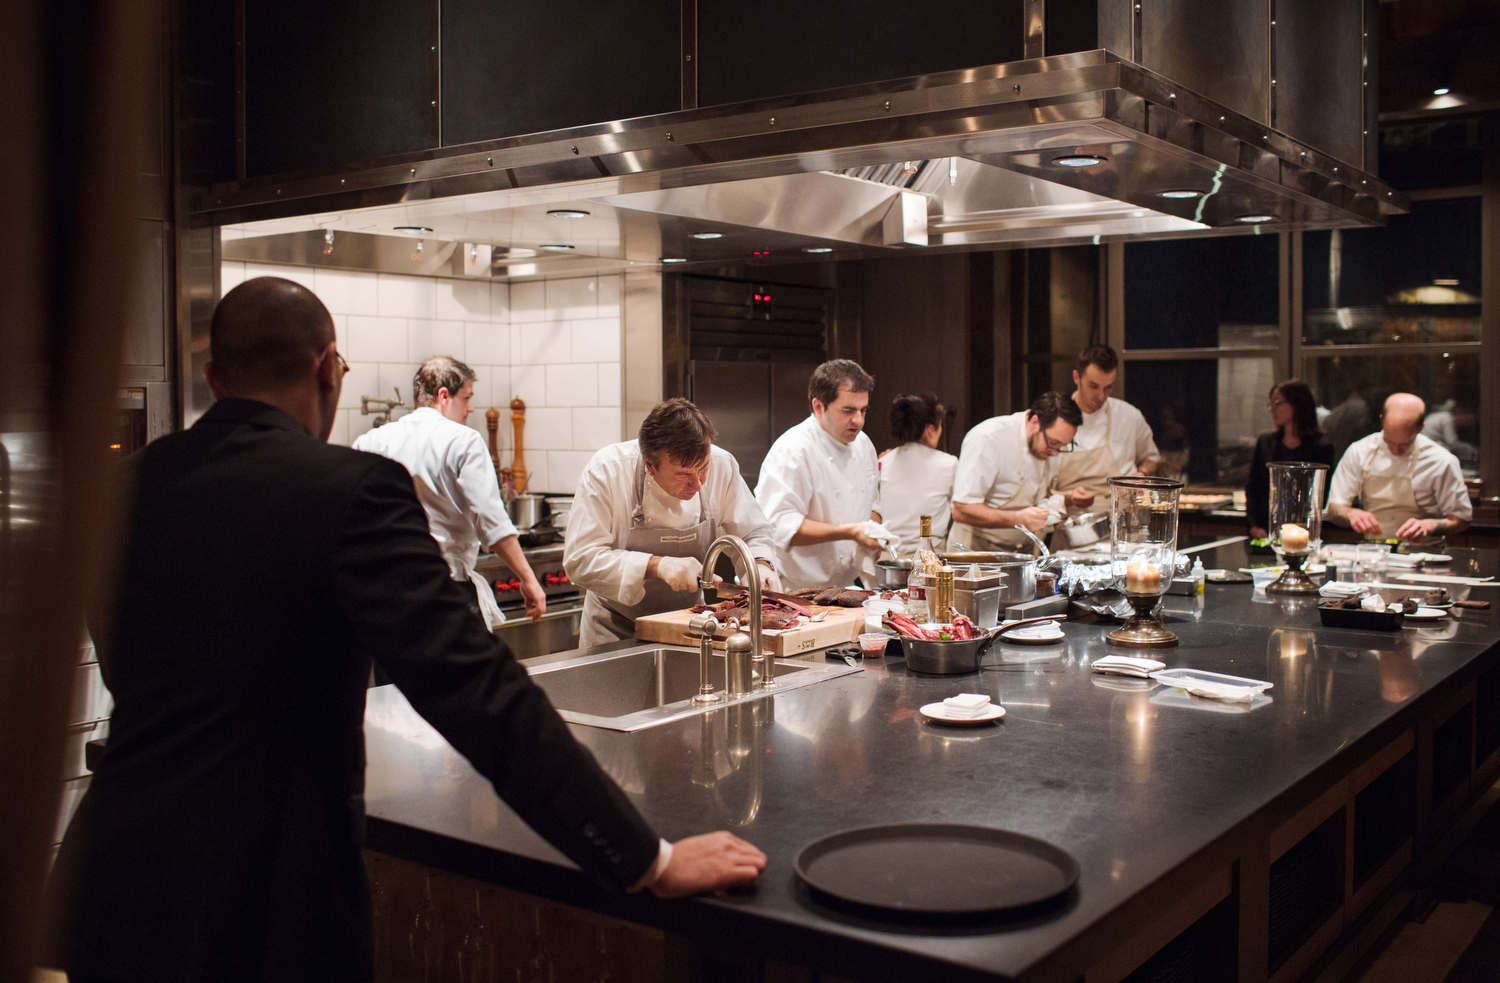  Images from La Paulée de San Francisco's Burgundy Week with chef Daniel Boulud. The dinner also featured Christopher Kostow, executive chef at The Restaurant at Meadowood in Napa Valley and Jean François Bruel, executive chef at DANIEL, whose restau